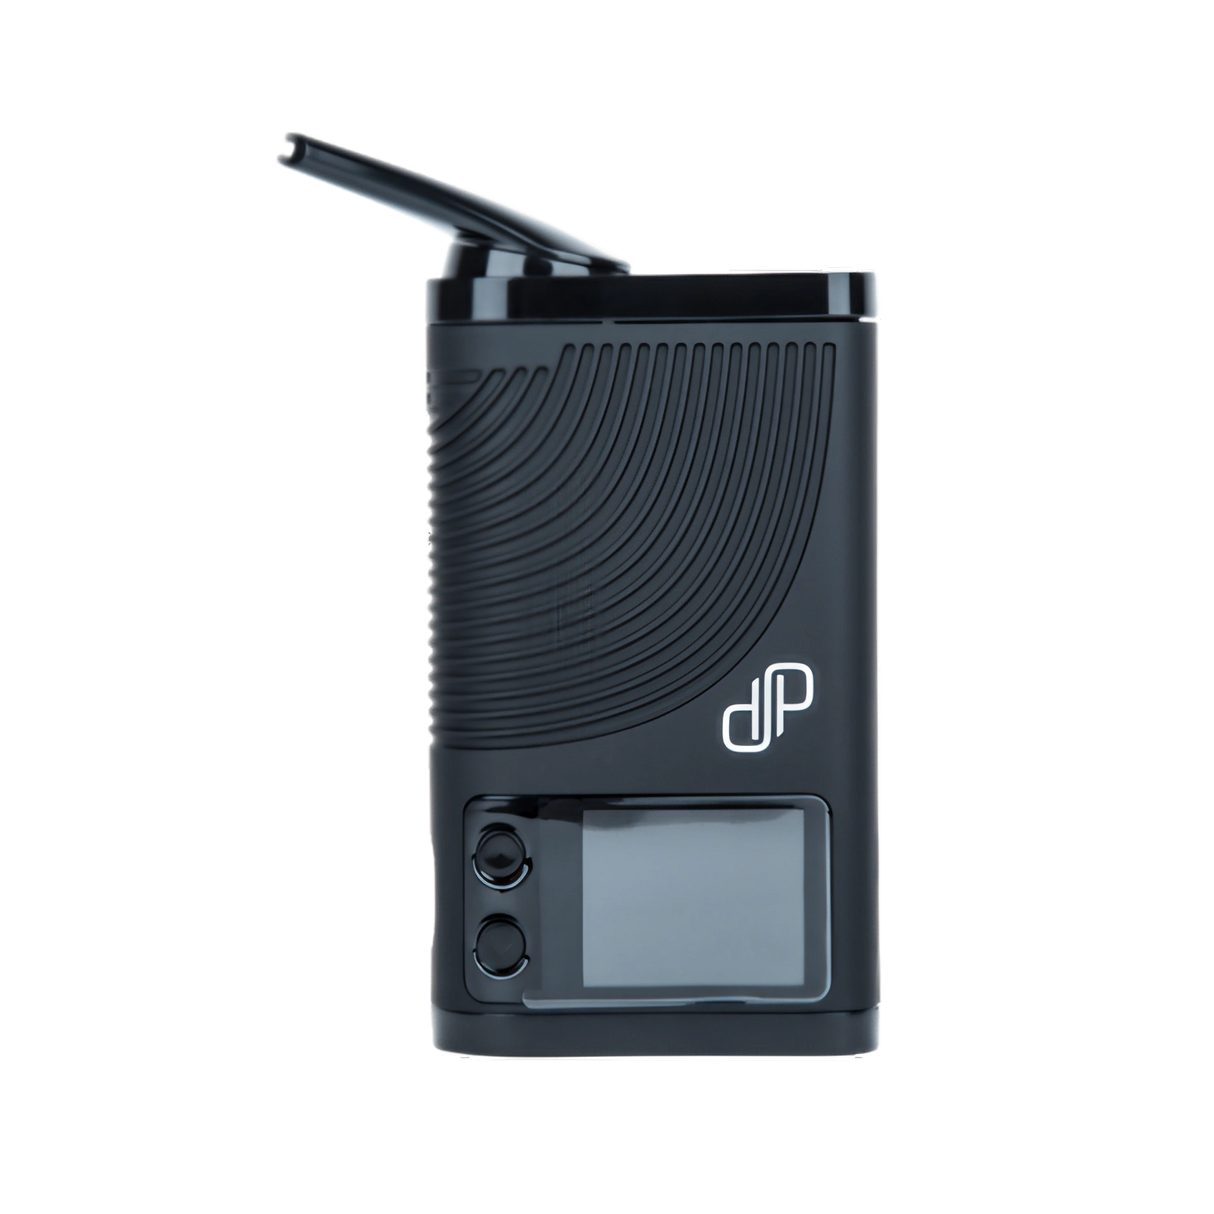 Boundless CFX Vaporizer front view with digital display for dry herbs and concentrates